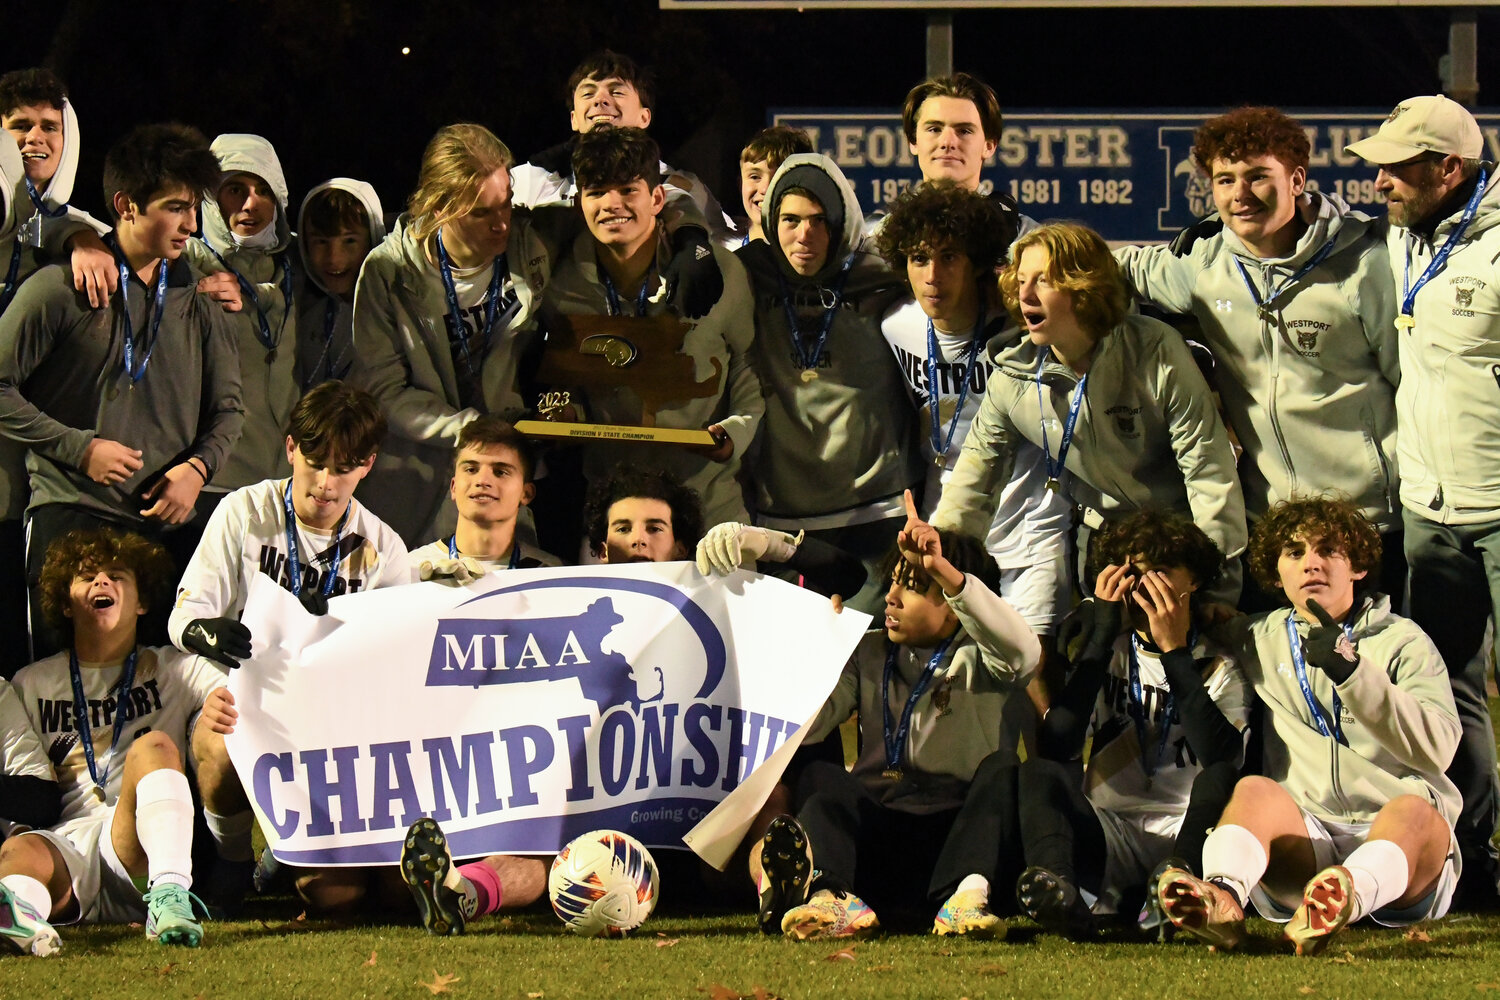 The MIAA Division V state soccer champion Westport Wildcats pose for a photo following their victory Saturday afternoon.